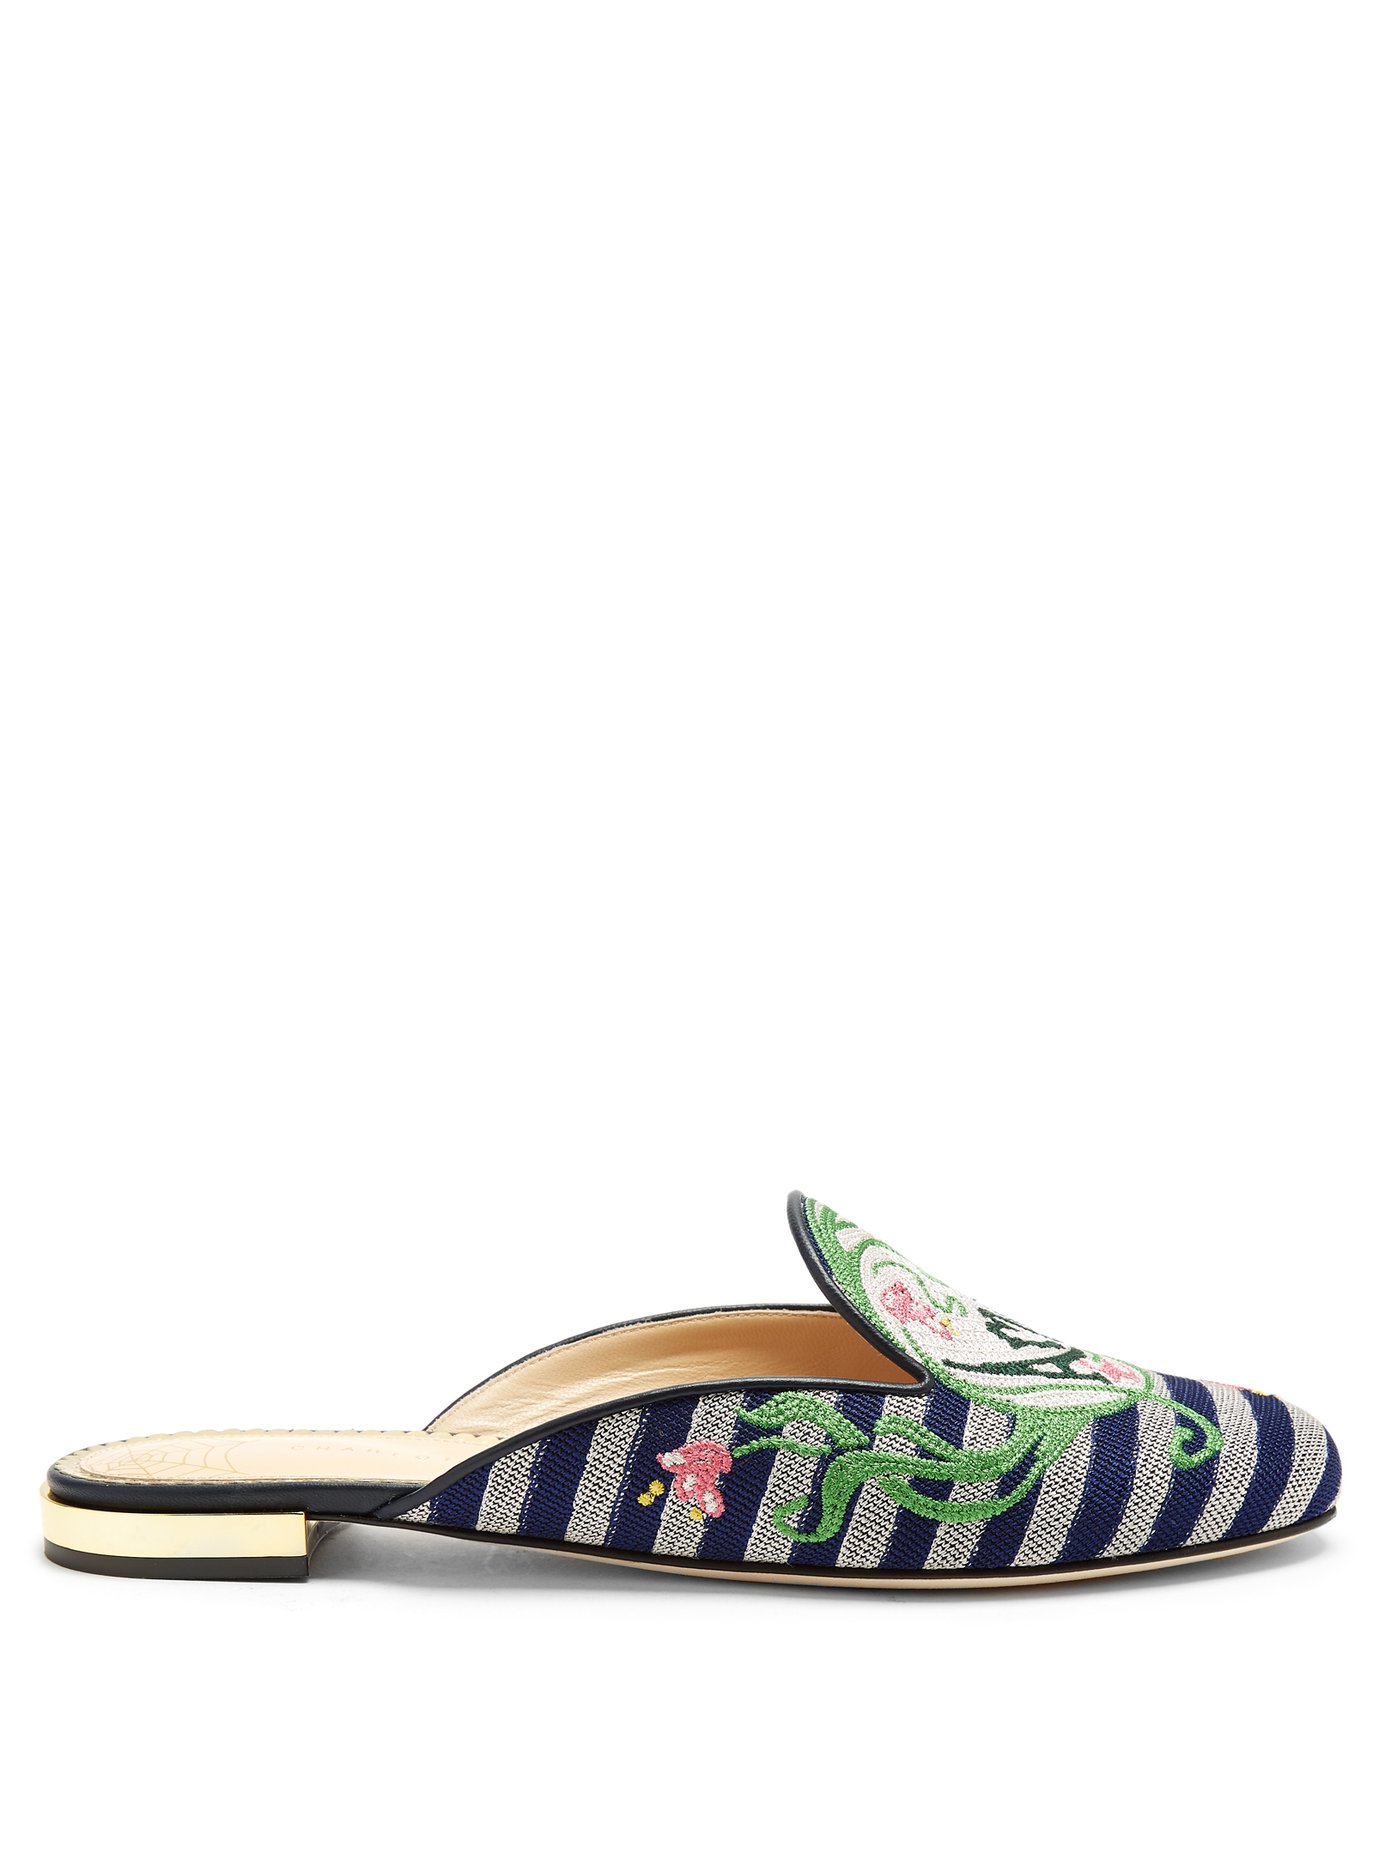 olympia embroidered loafer